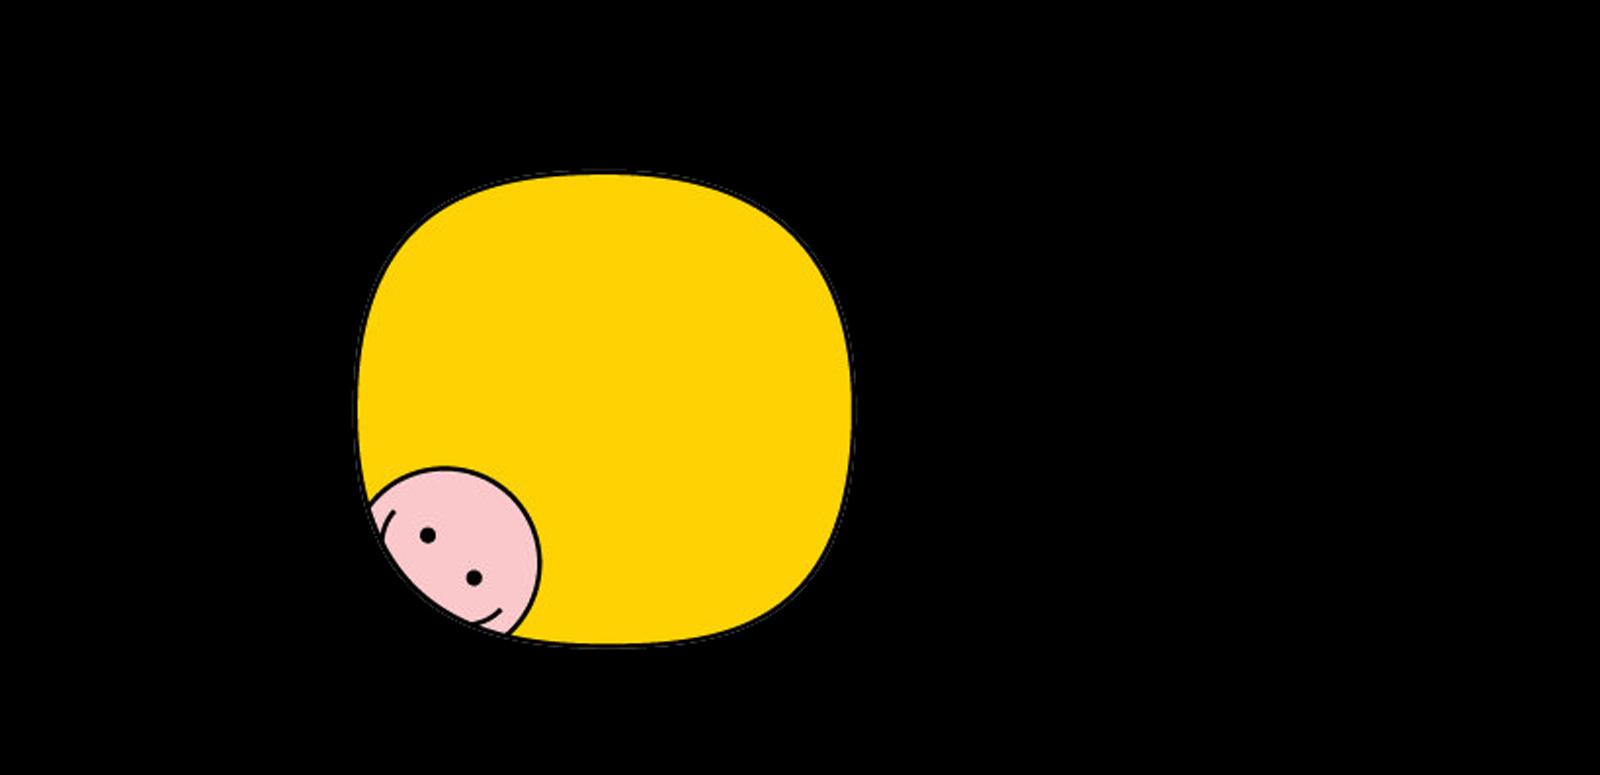 Australian Children’s Television Foundation logo - yellow circle with a pink smiley face at the edge on a black background